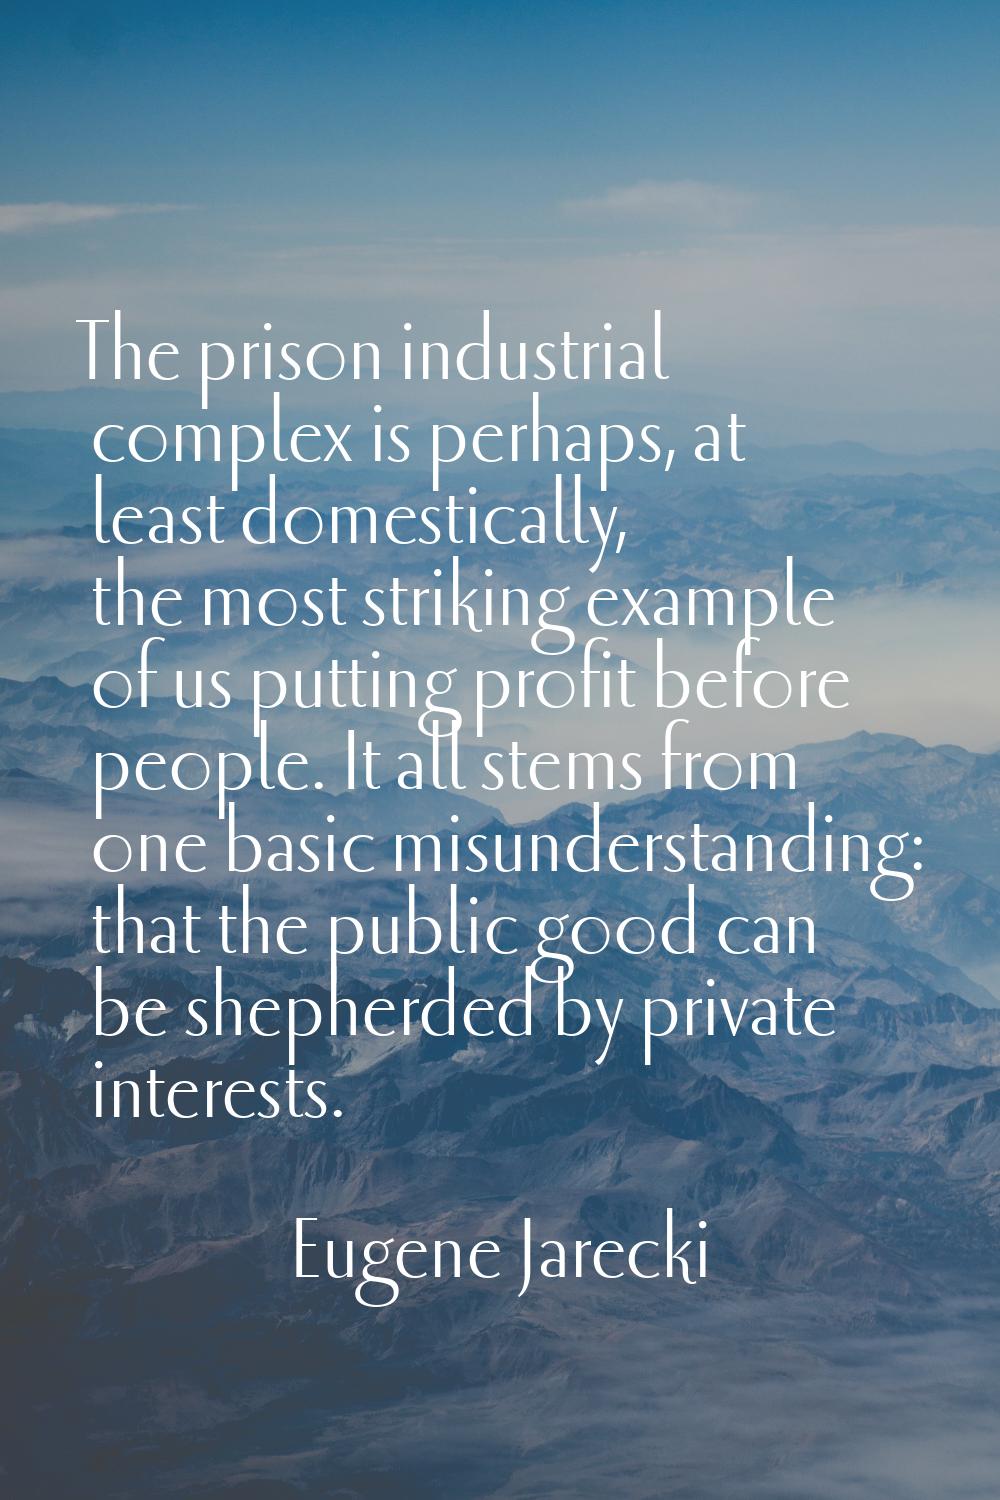 The prison industrial complex is perhaps, at least domestically, the most striking example of us pu